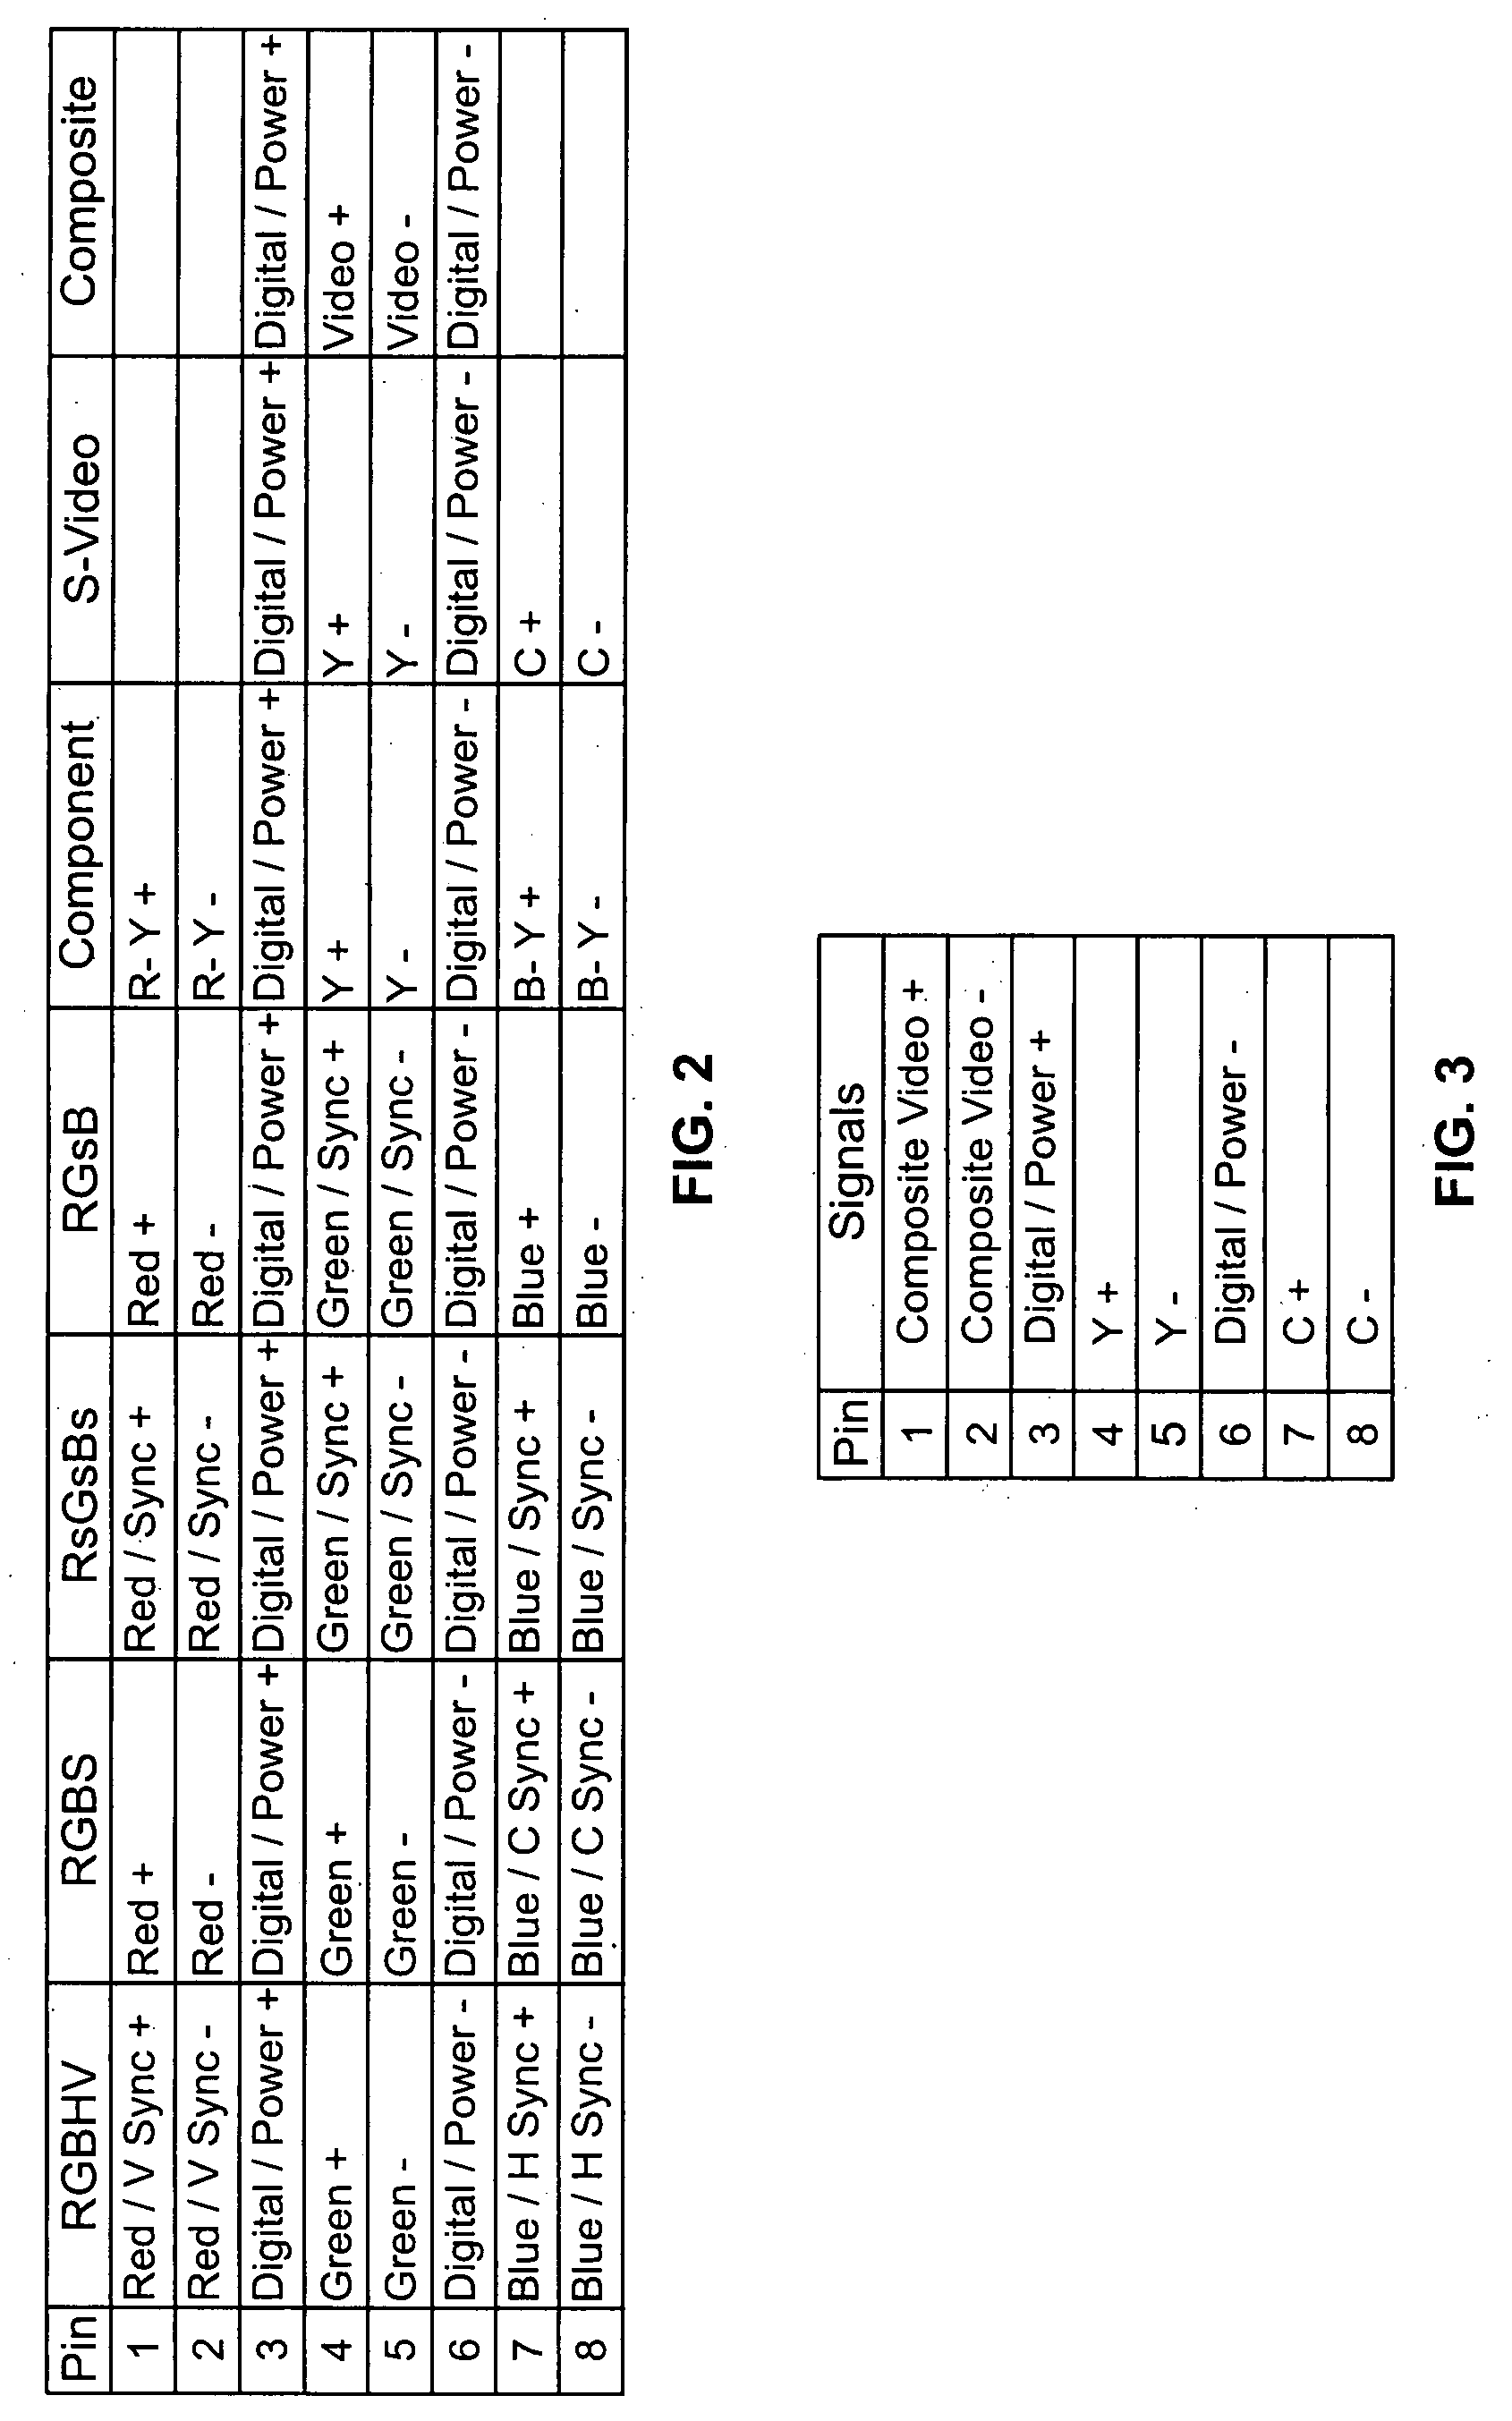 Automatic video format identification system